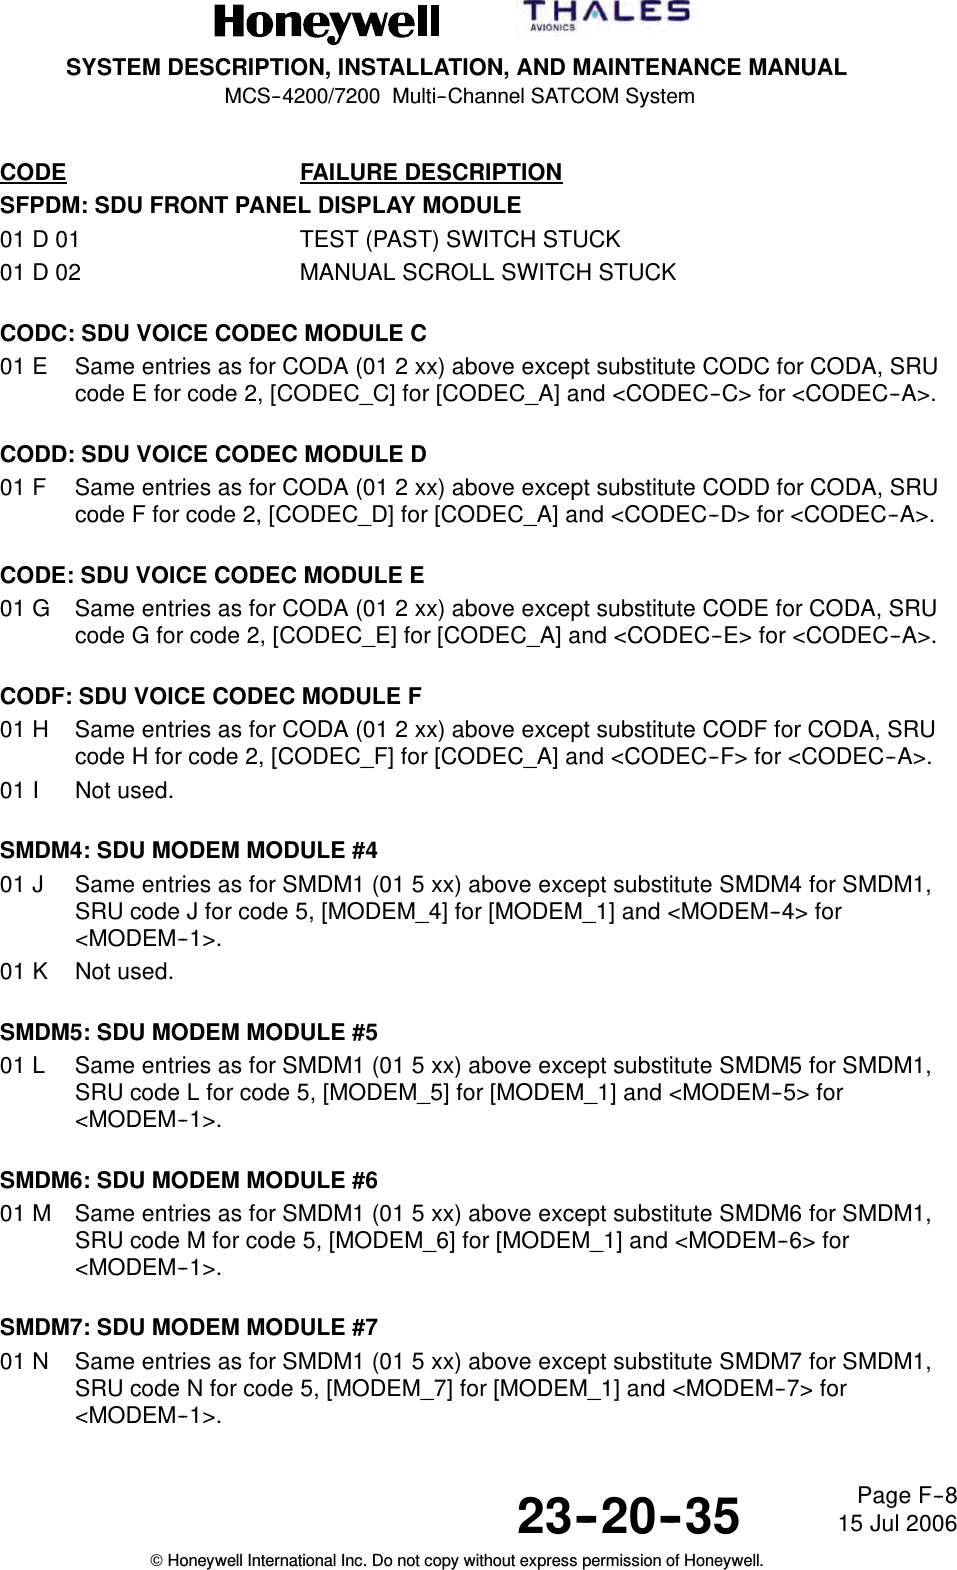 SYSTEM DESCRIPTION, INSTALLATION, AND MAINTENANCE MANUALMCS--4200/7200 Multi--Channel SATCOM System23--20--35 15 Jul 2006Honeywell International Inc. Do not copy without express permission of Honeywell.Page F--8CODE FAILURE DESCRIPTIONSFPDM: SDU FRONT PANEL DISPLAY MODULE01 D 01 TEST (PAST) SWITCH STUCK01 D 02 MANUAL SCROLL SWITCH STUCKCODC: SDU VOICE CODEC MODULE C01 E Same entries as for CODA (01 2 xx) above except substitute CODC for CODA, SRUcode E for code 2, [CODEC_C] for [CODEC_A] and &lt;CODEC--C&gt; for &lt;CODEC--A&gt;.CODD: SDU VOICE CODEC MODULE D01 F Same entries as for CODA (01 2 xx) above except substitute CODD for CODA, SRUcode F for code 2, [CODEC_D] for [CODEC_A] and &lt;CODEC--D&gt; for &lt;CODEC--A&gt;.CODE: SDU VOICE CODEC MODULE E01 G Same entries as for CODA (01 2 xx) above except substitute CODE for CODA, SRUcode G for code 2, [CODEC_E] for [CODEC_A] and &lt;CODEC--E&gt; for &lt;CODEC--A&gt;.CODF: SDU VOICE CODEC MODULE F01 H Same entries as for CODA (01 2 xx) above except substitute CODF for CODA, SRUcode H for code 2, [CODEC_F] for [CODEC_A] and &lt;CODEC--F&gt; for &lt;CODEC--A&gt;.01 I Not used.SMDM4: SDU MODEM MODULE #401 J Same entries as for SMDM1 (01 5 xx) above except substitute SMDM4 for SMDM1,SRU code J for code 5, [MODEM_4] for [MODEM_1] and &lt;MODEM--4&gt; for&lt;MODEM--1&gt;.01 K Not used.SMDM5: SDU MODEM MODULE #501 L Same entries as for SMDM1 (01 5 xx) above except substitute SMDM5 for SMDM1,SRU code L for code 5, [MODEM_5] for [MODEM_1] and &lt;MODEM--5&gt; for&lt;MODEM--1&gt;.SMDM6: SDU MODEM MODULE #601 M Same entries as for SMDM1 (01 5 xx) above except substitute SMDM6 for SMDM1,SRU code M for code 5, [MODEM_6] for [MODEM_1] and &lt;MODEM--6&gt; for&lt;MODEM--1&gt;.SMDM7: SDU MODEM MODULE #701 N Same entries as for SMDM1 (01 5 xx) above except substitute SMDM7 for SMDM1,SRU code N for code 5, [MODEM_7] for [MODEM_1] and &lt;MODEM--7&gt; for&lt;MODEM--1&gt;.